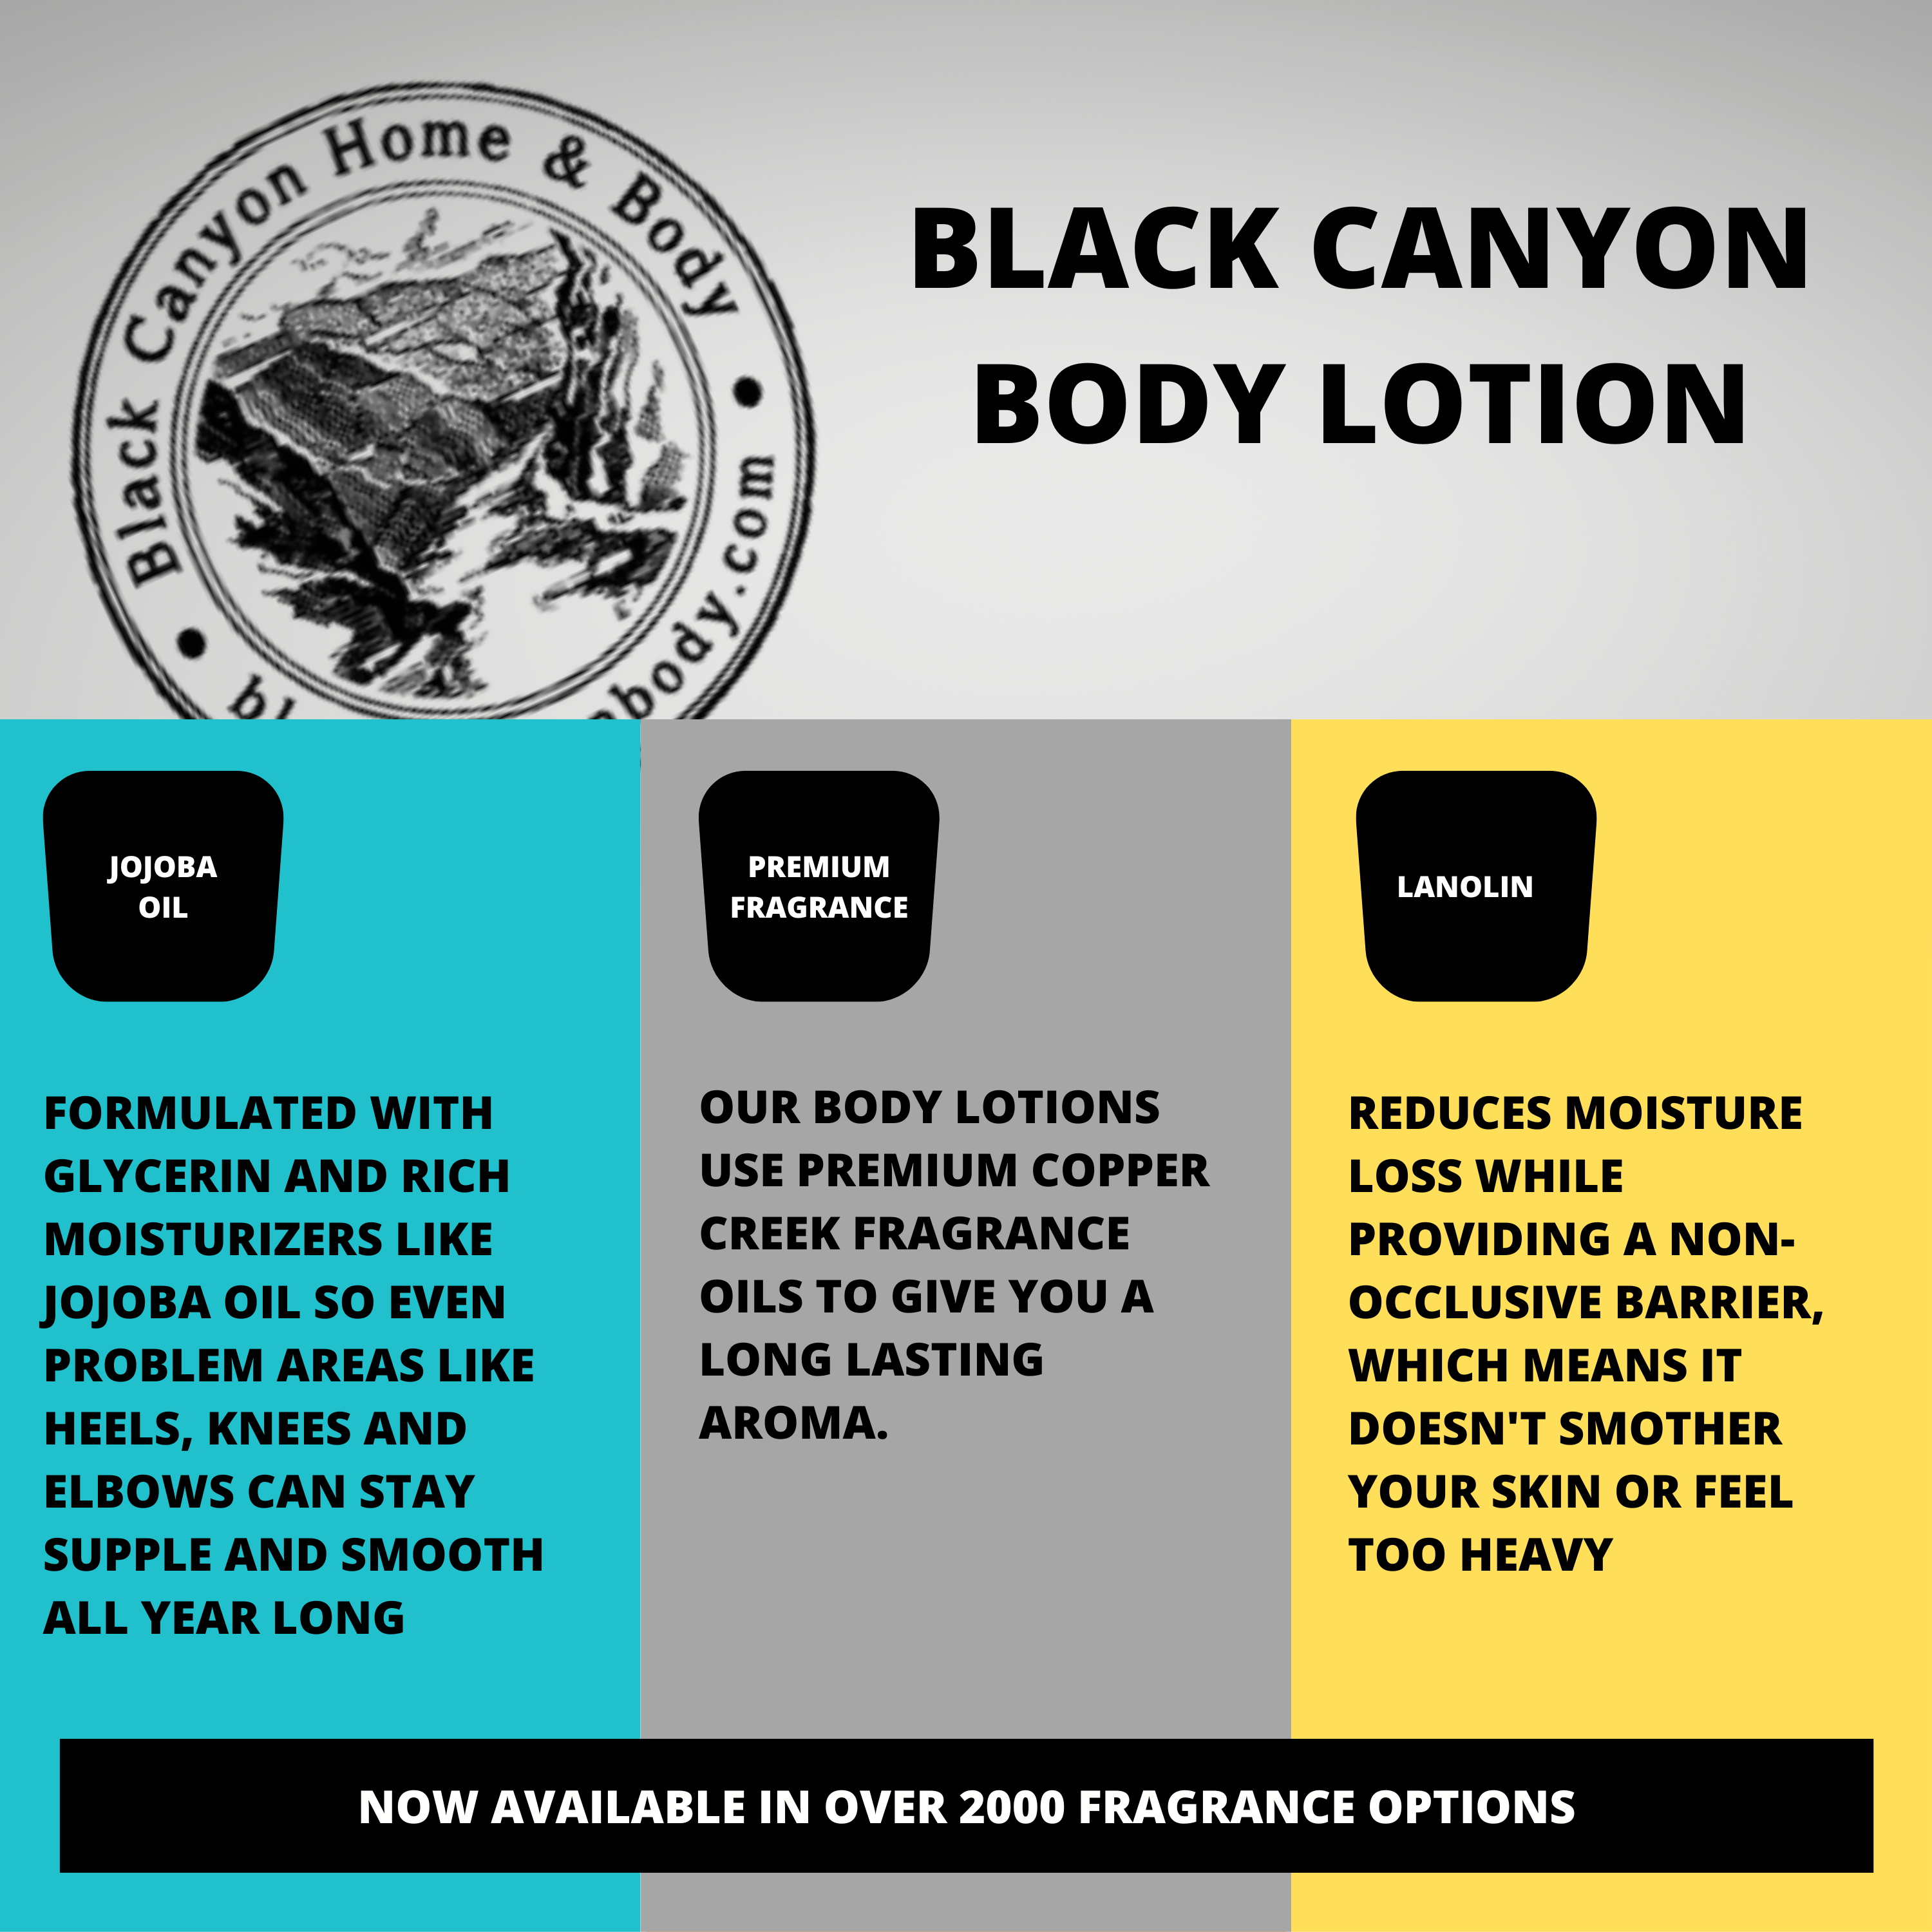 Black Canyon Apple Honey Cider Scented Luxury Body Lotion with Lanolin and Jojoba Oil